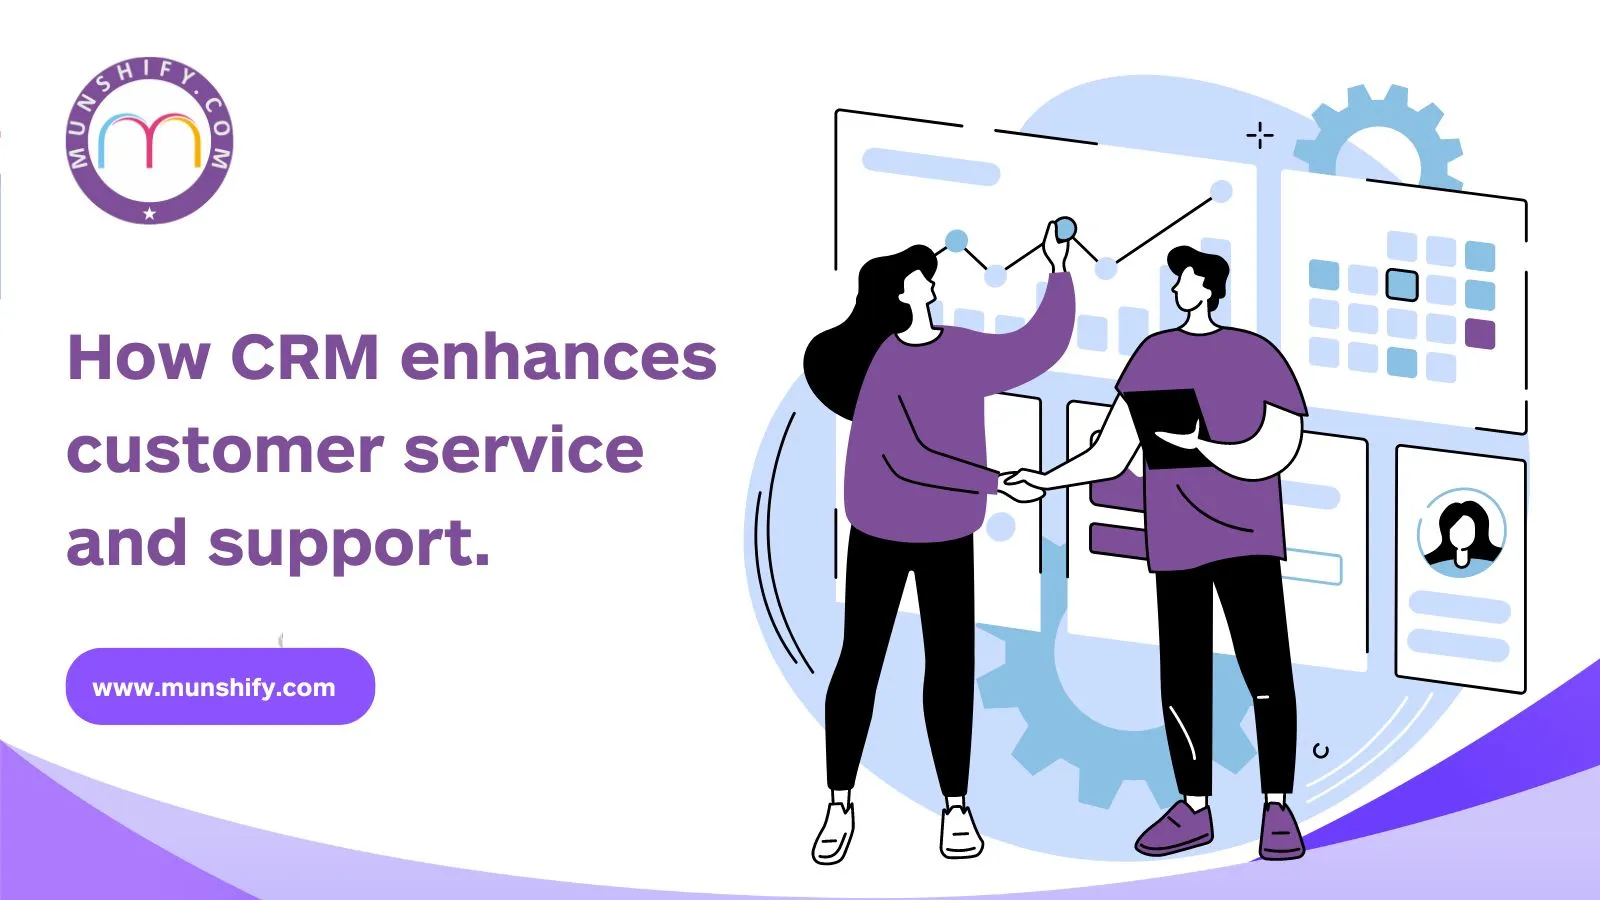 How CRM enhances customer service and support.